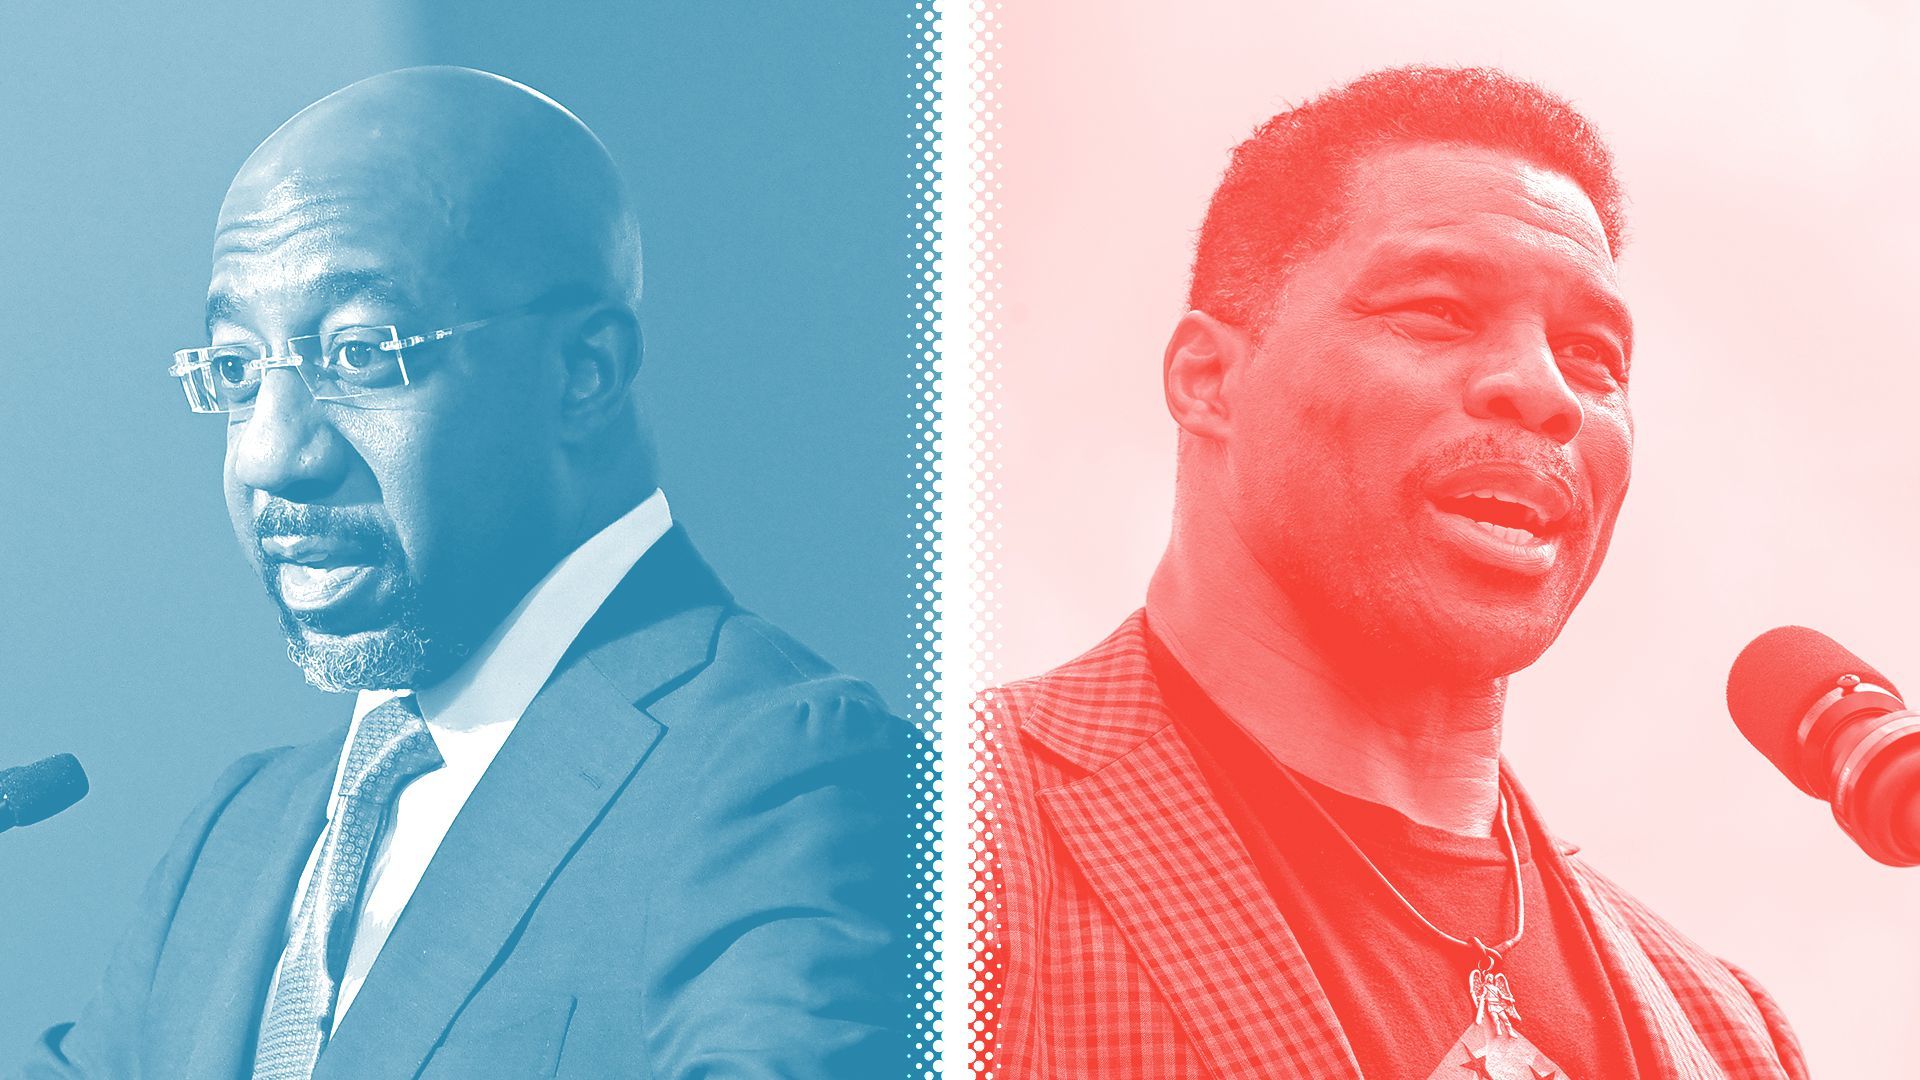 Photo illustration of Raphael Warnock tinted blue and Herschel Walker tinted red separated by a white halftone divider.